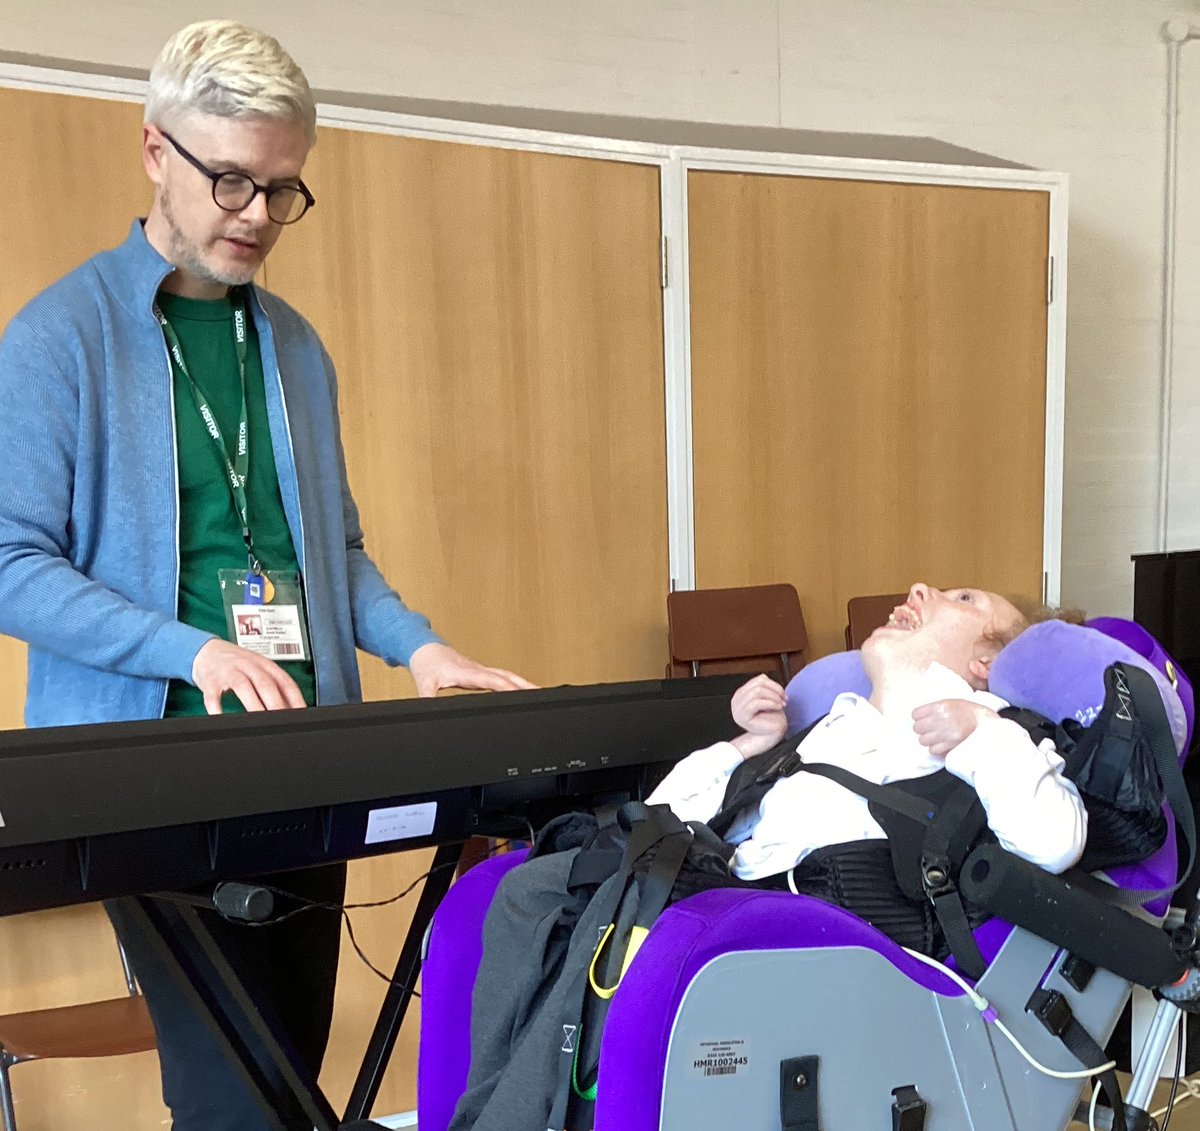 This student enjoyed duetting with Alan this morning, during her music therapy session. 🎶 #musictherapy